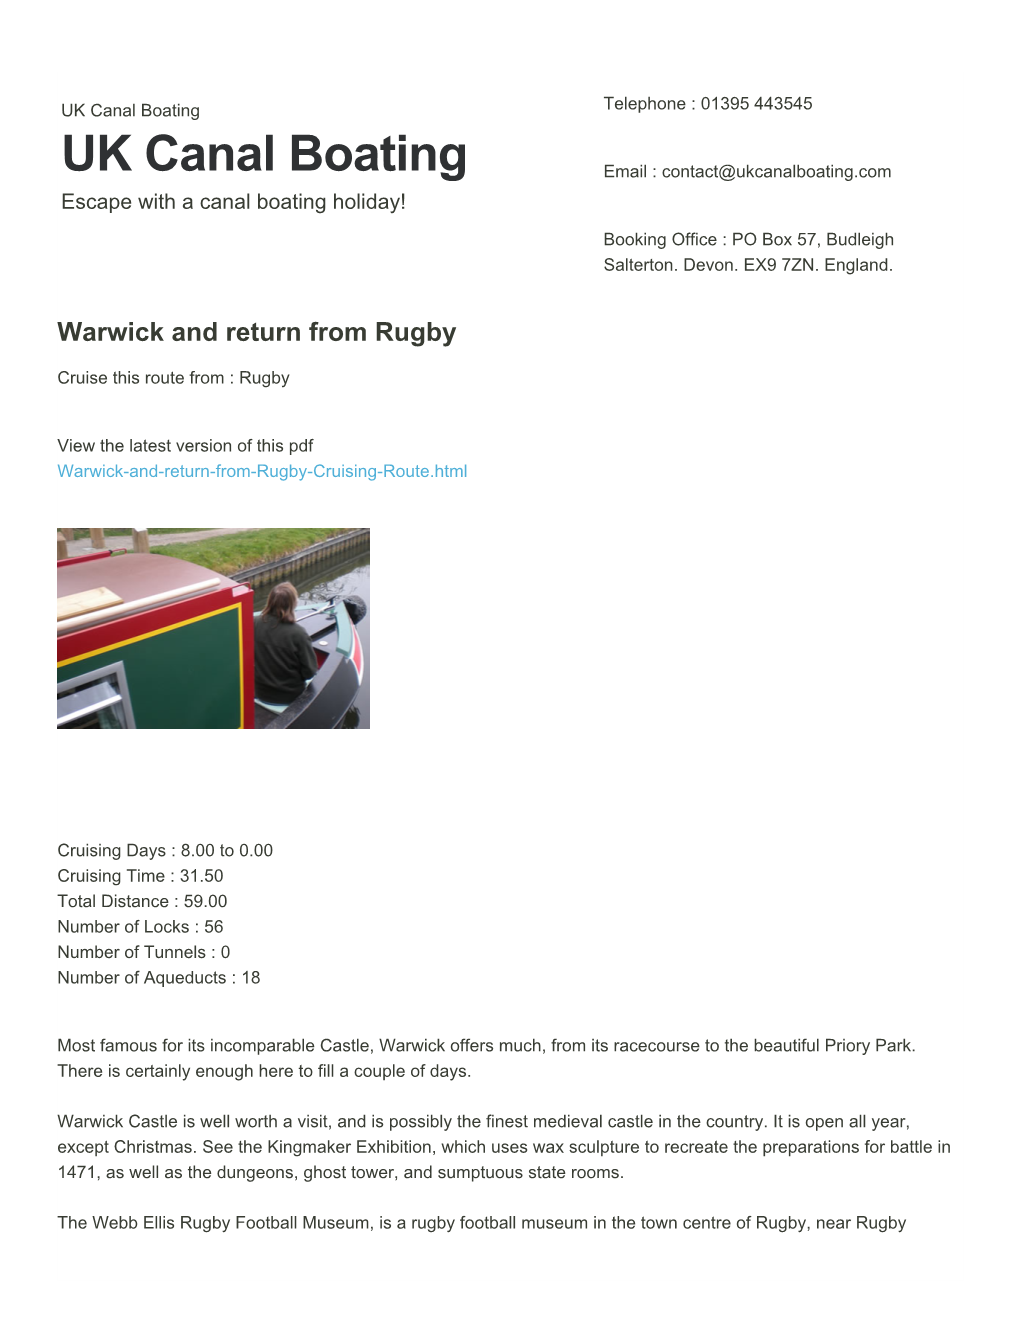 Warwick and Return from Rugby | UK Canal Boating